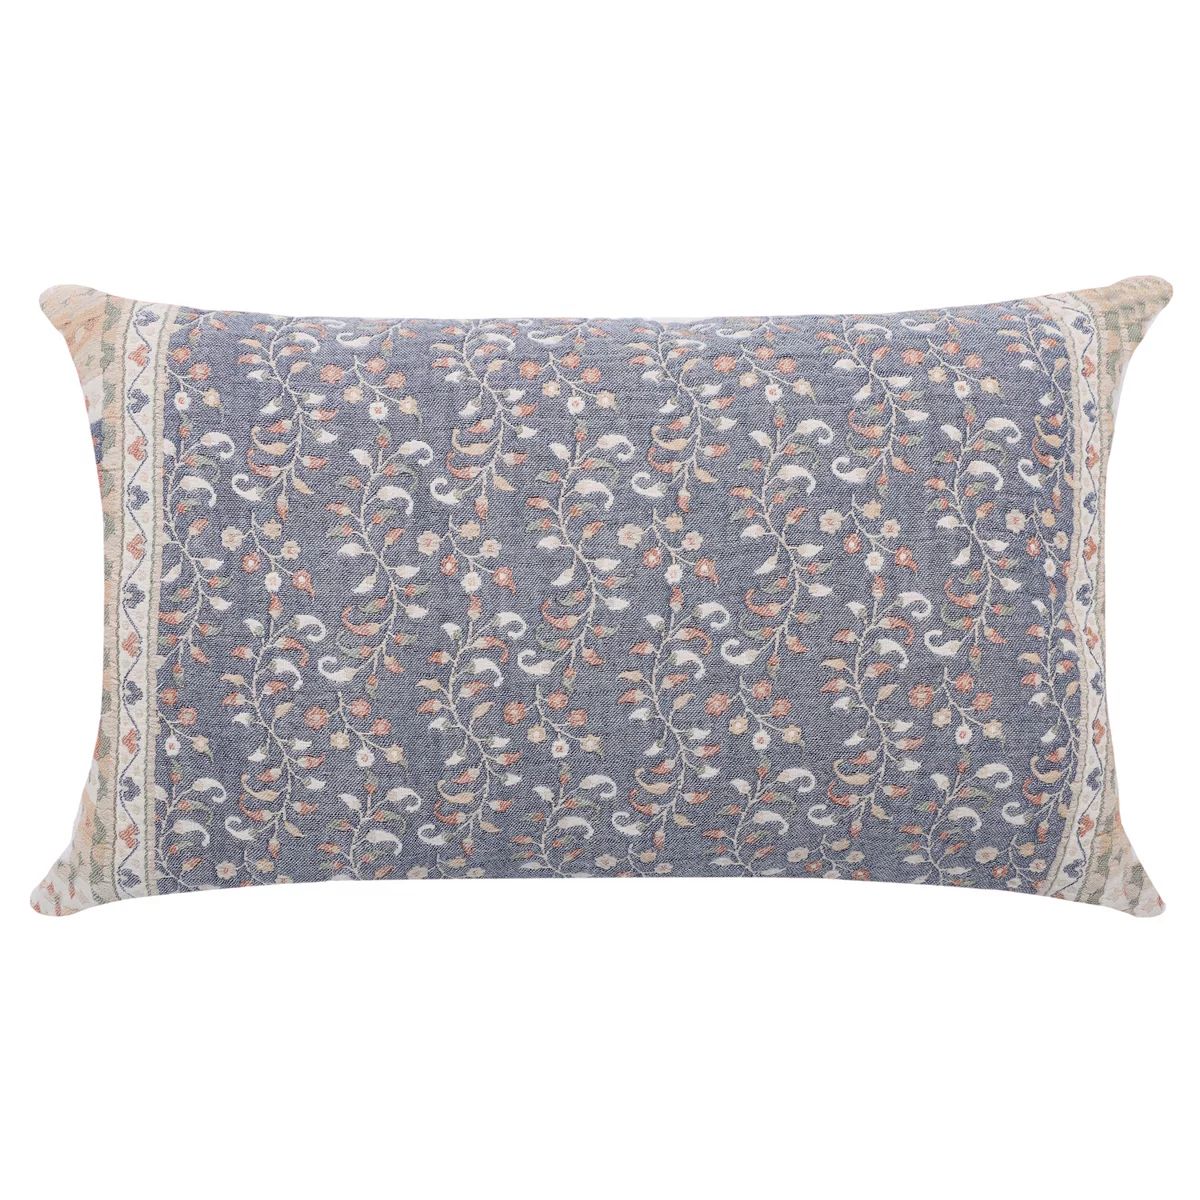 Sonoma Goods For Life® 16x26 Ultimate Feather Fill Decorative Pillow | Kohl's